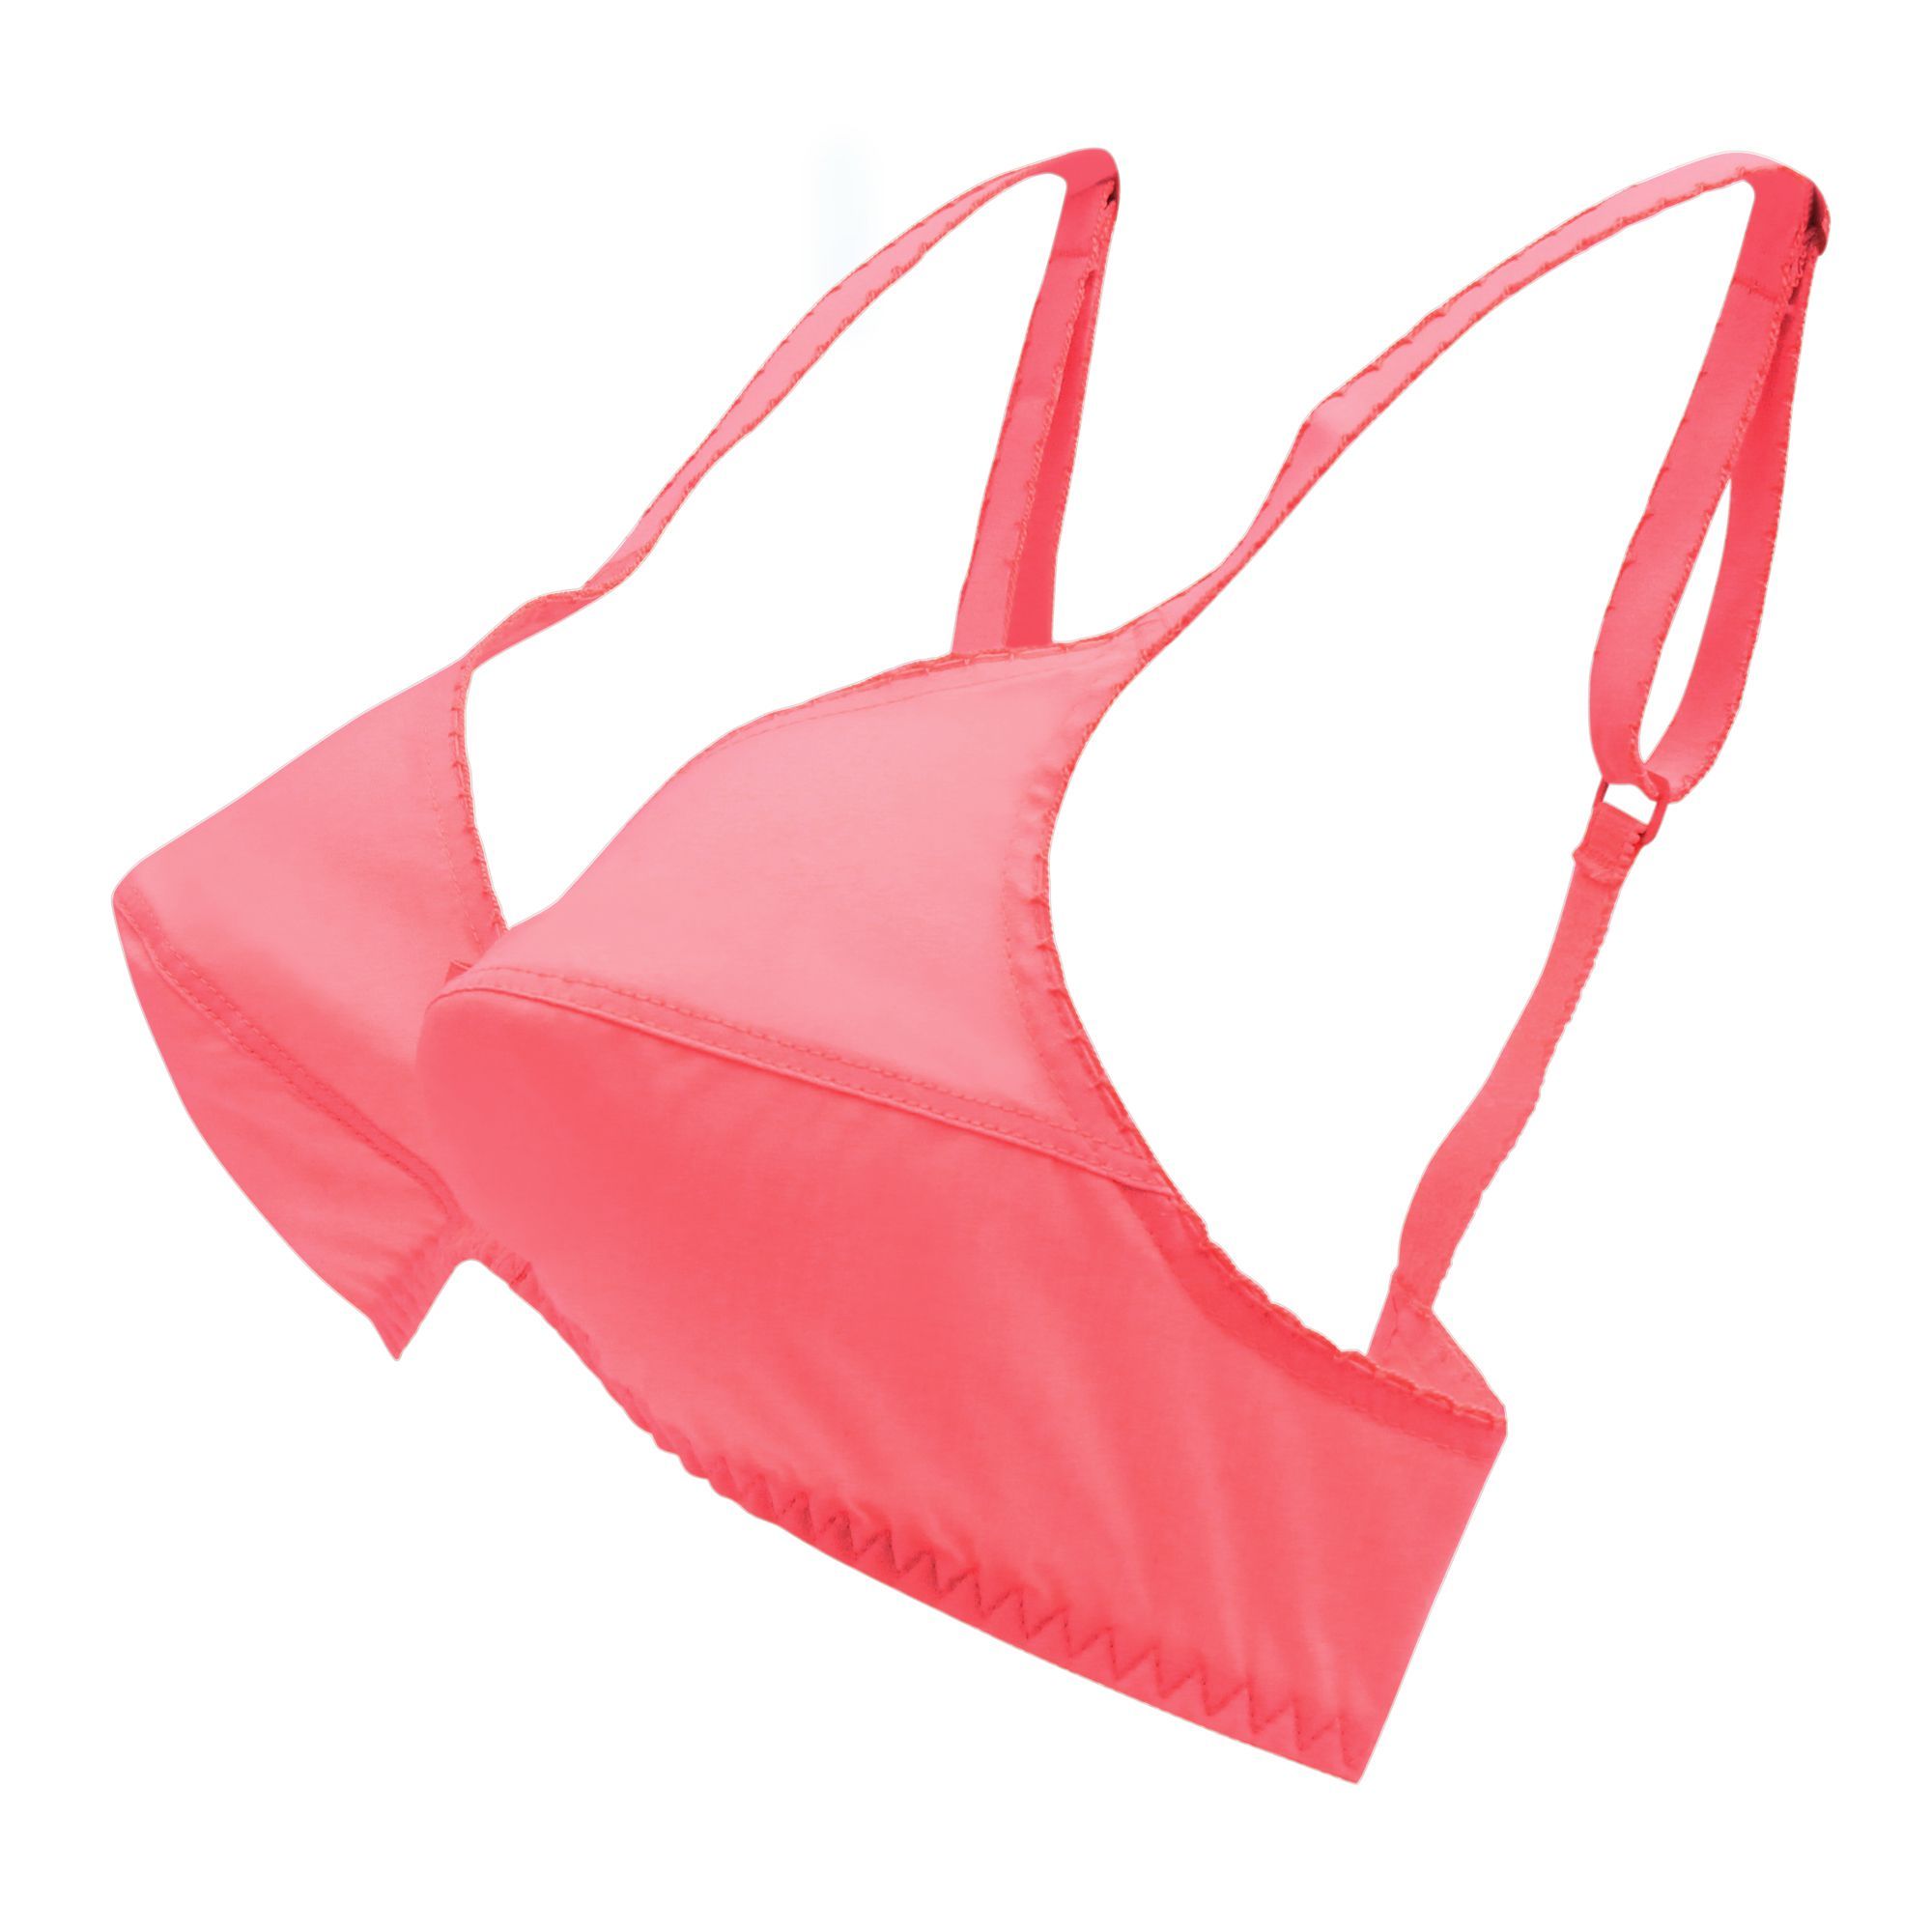 Order IFG Classic Bra, Corell Pink Online at Special Price in